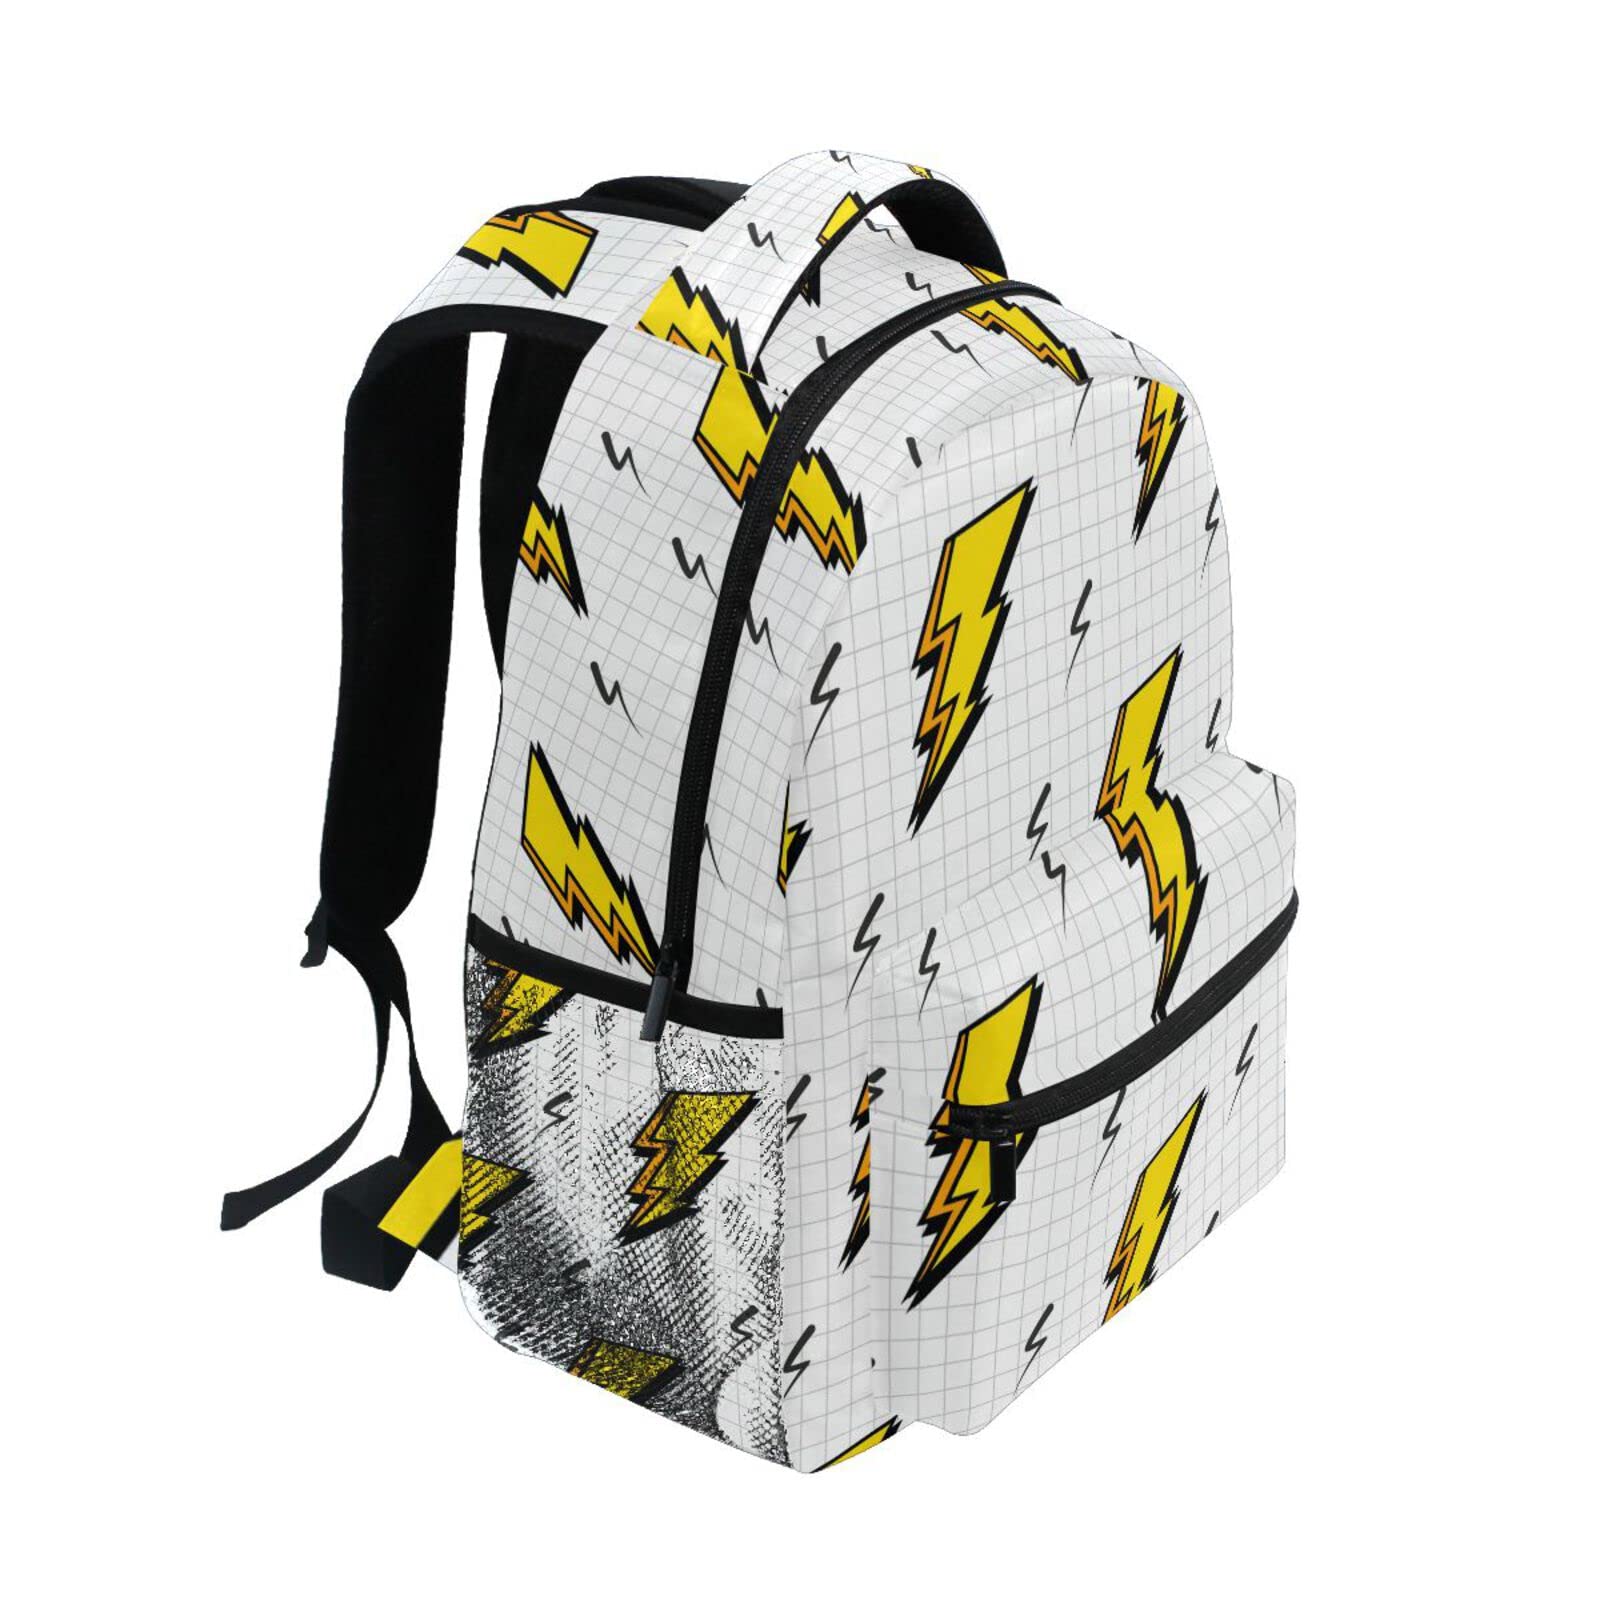 Tarity Lightning Bolts School Backpack Small Travel Bag Students Bookbags Teenagers Casual Daypacks Stylish Print Durable Backpack Laptop Computer Bag For Kids Boys Girls Women